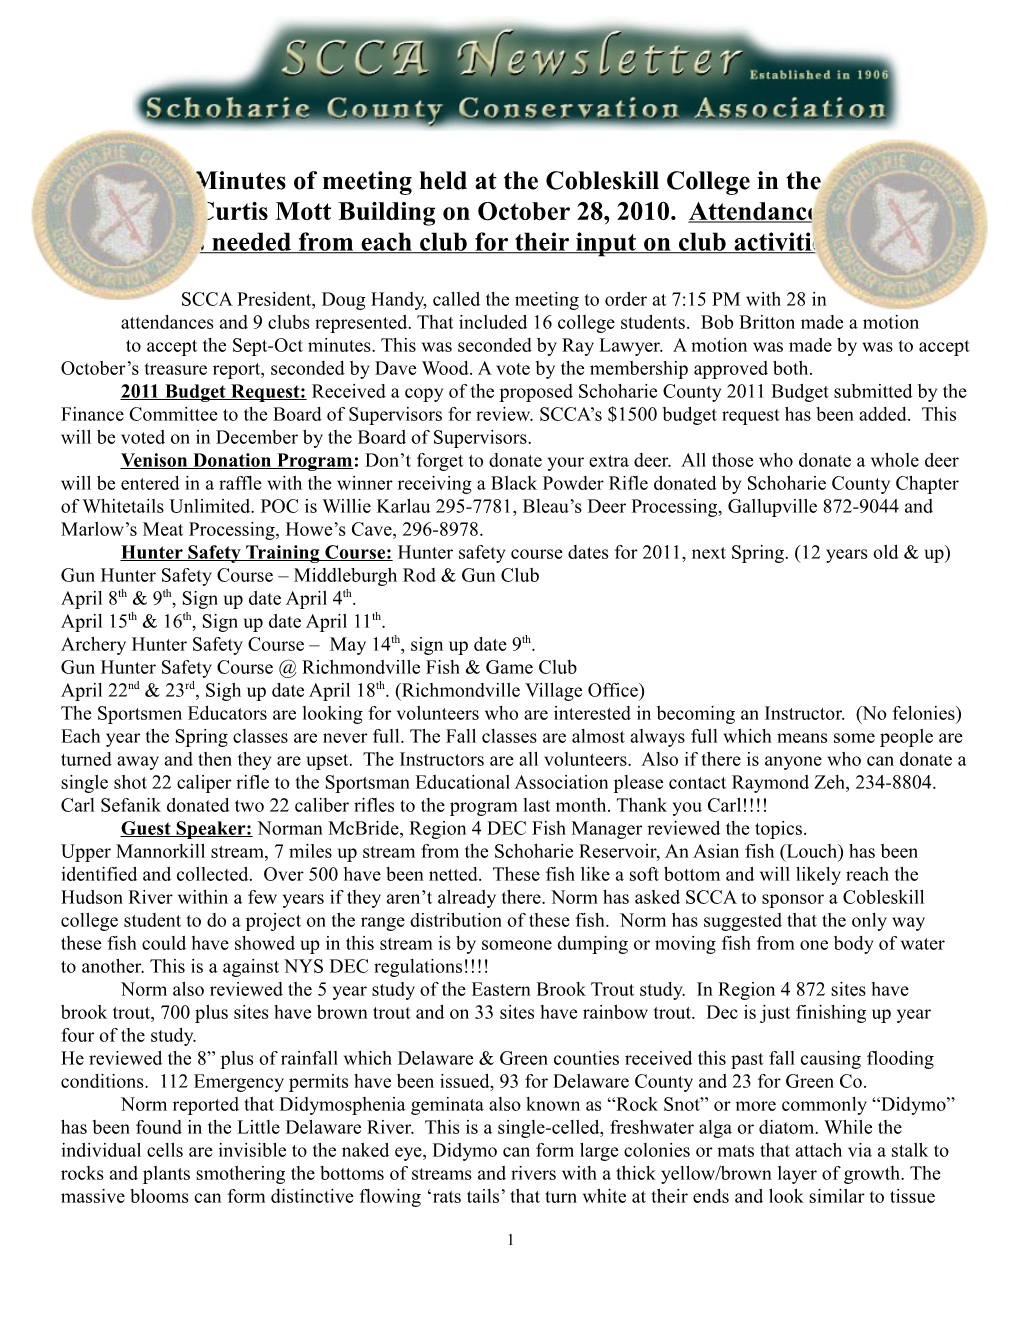 Minutes of Meeting Held at the Cobleskill College in The